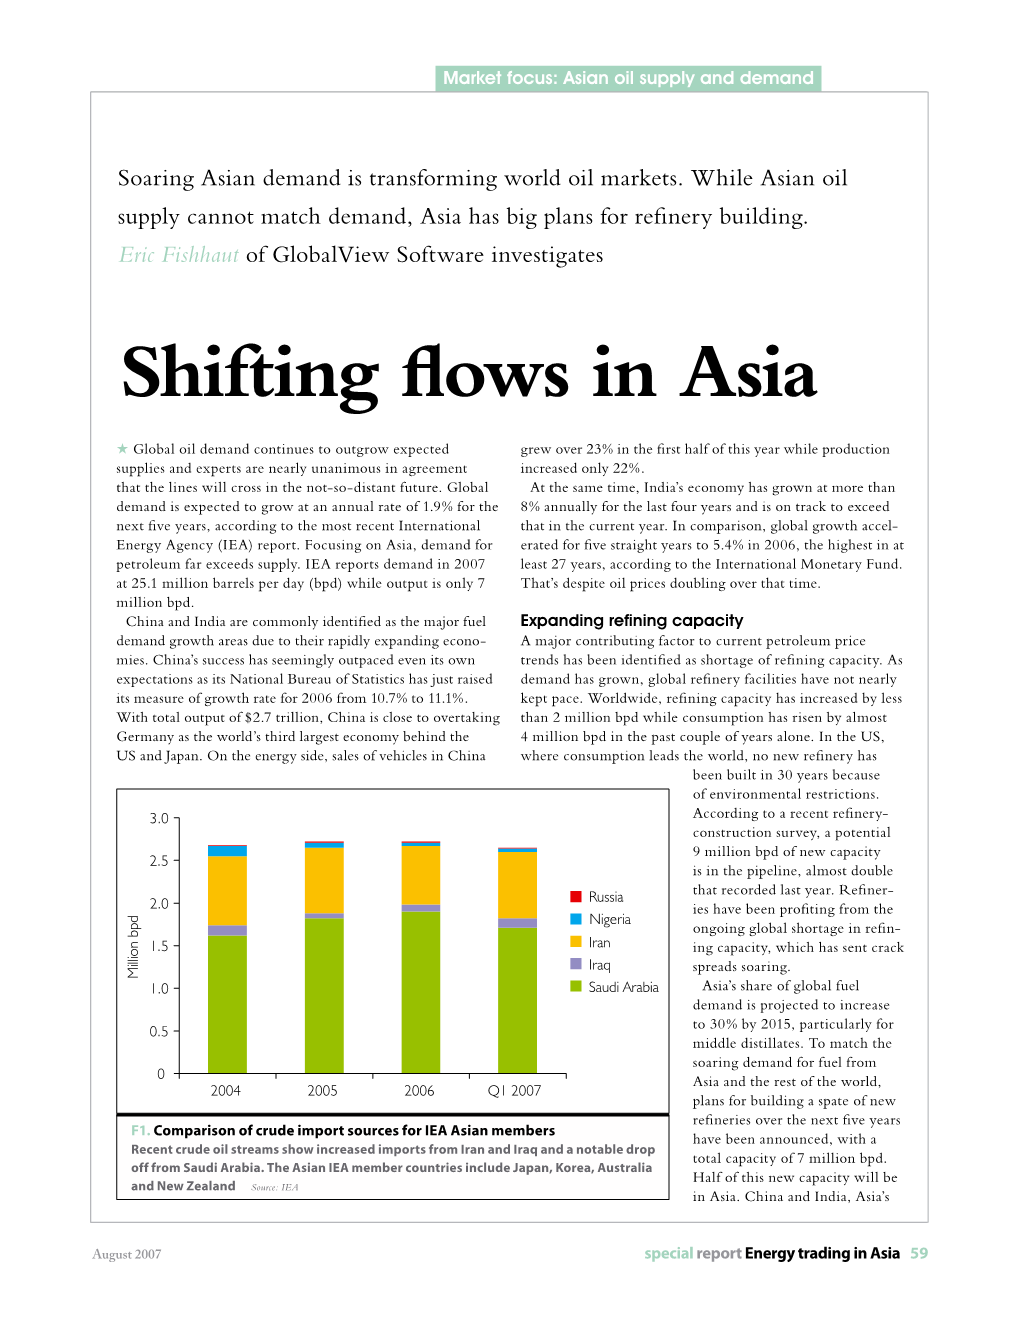 Shifting Flows in Asia